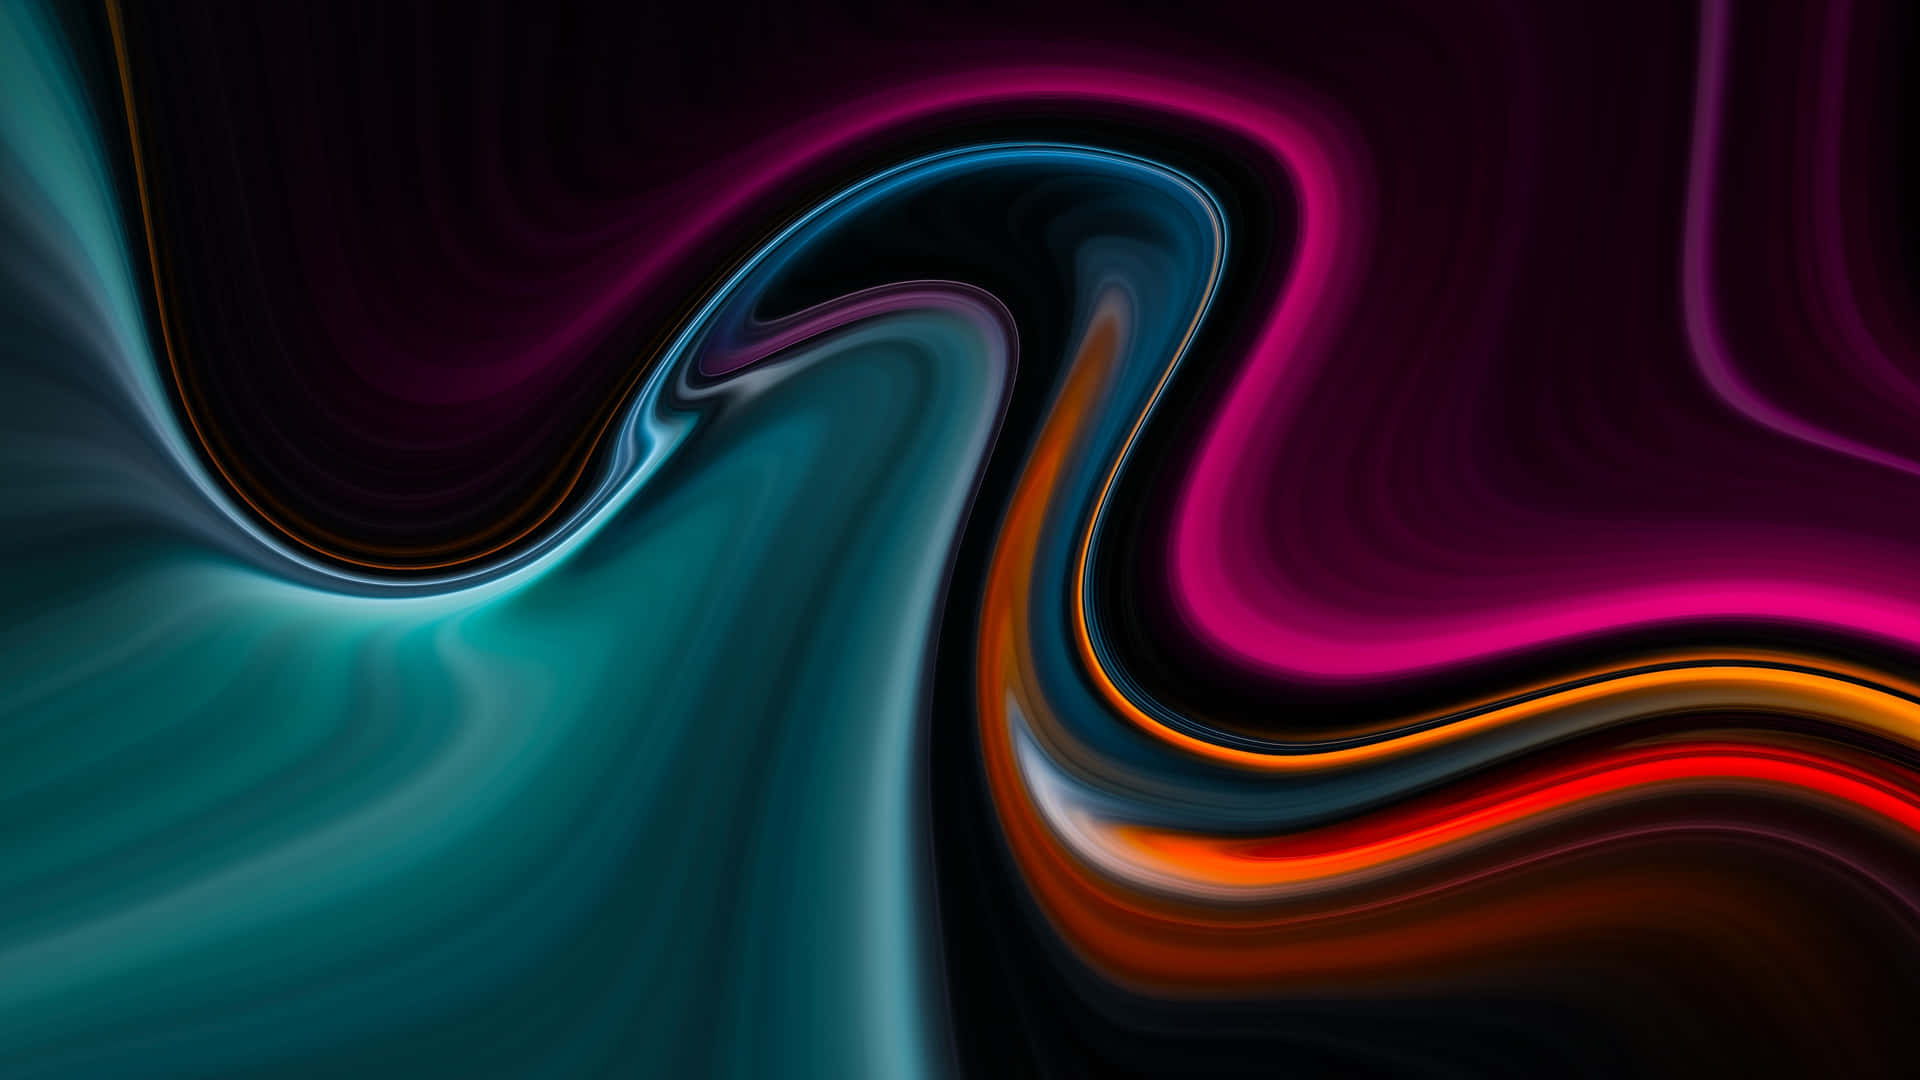 A Modern Bright And Vivid Colorful Abstract Art Design Background